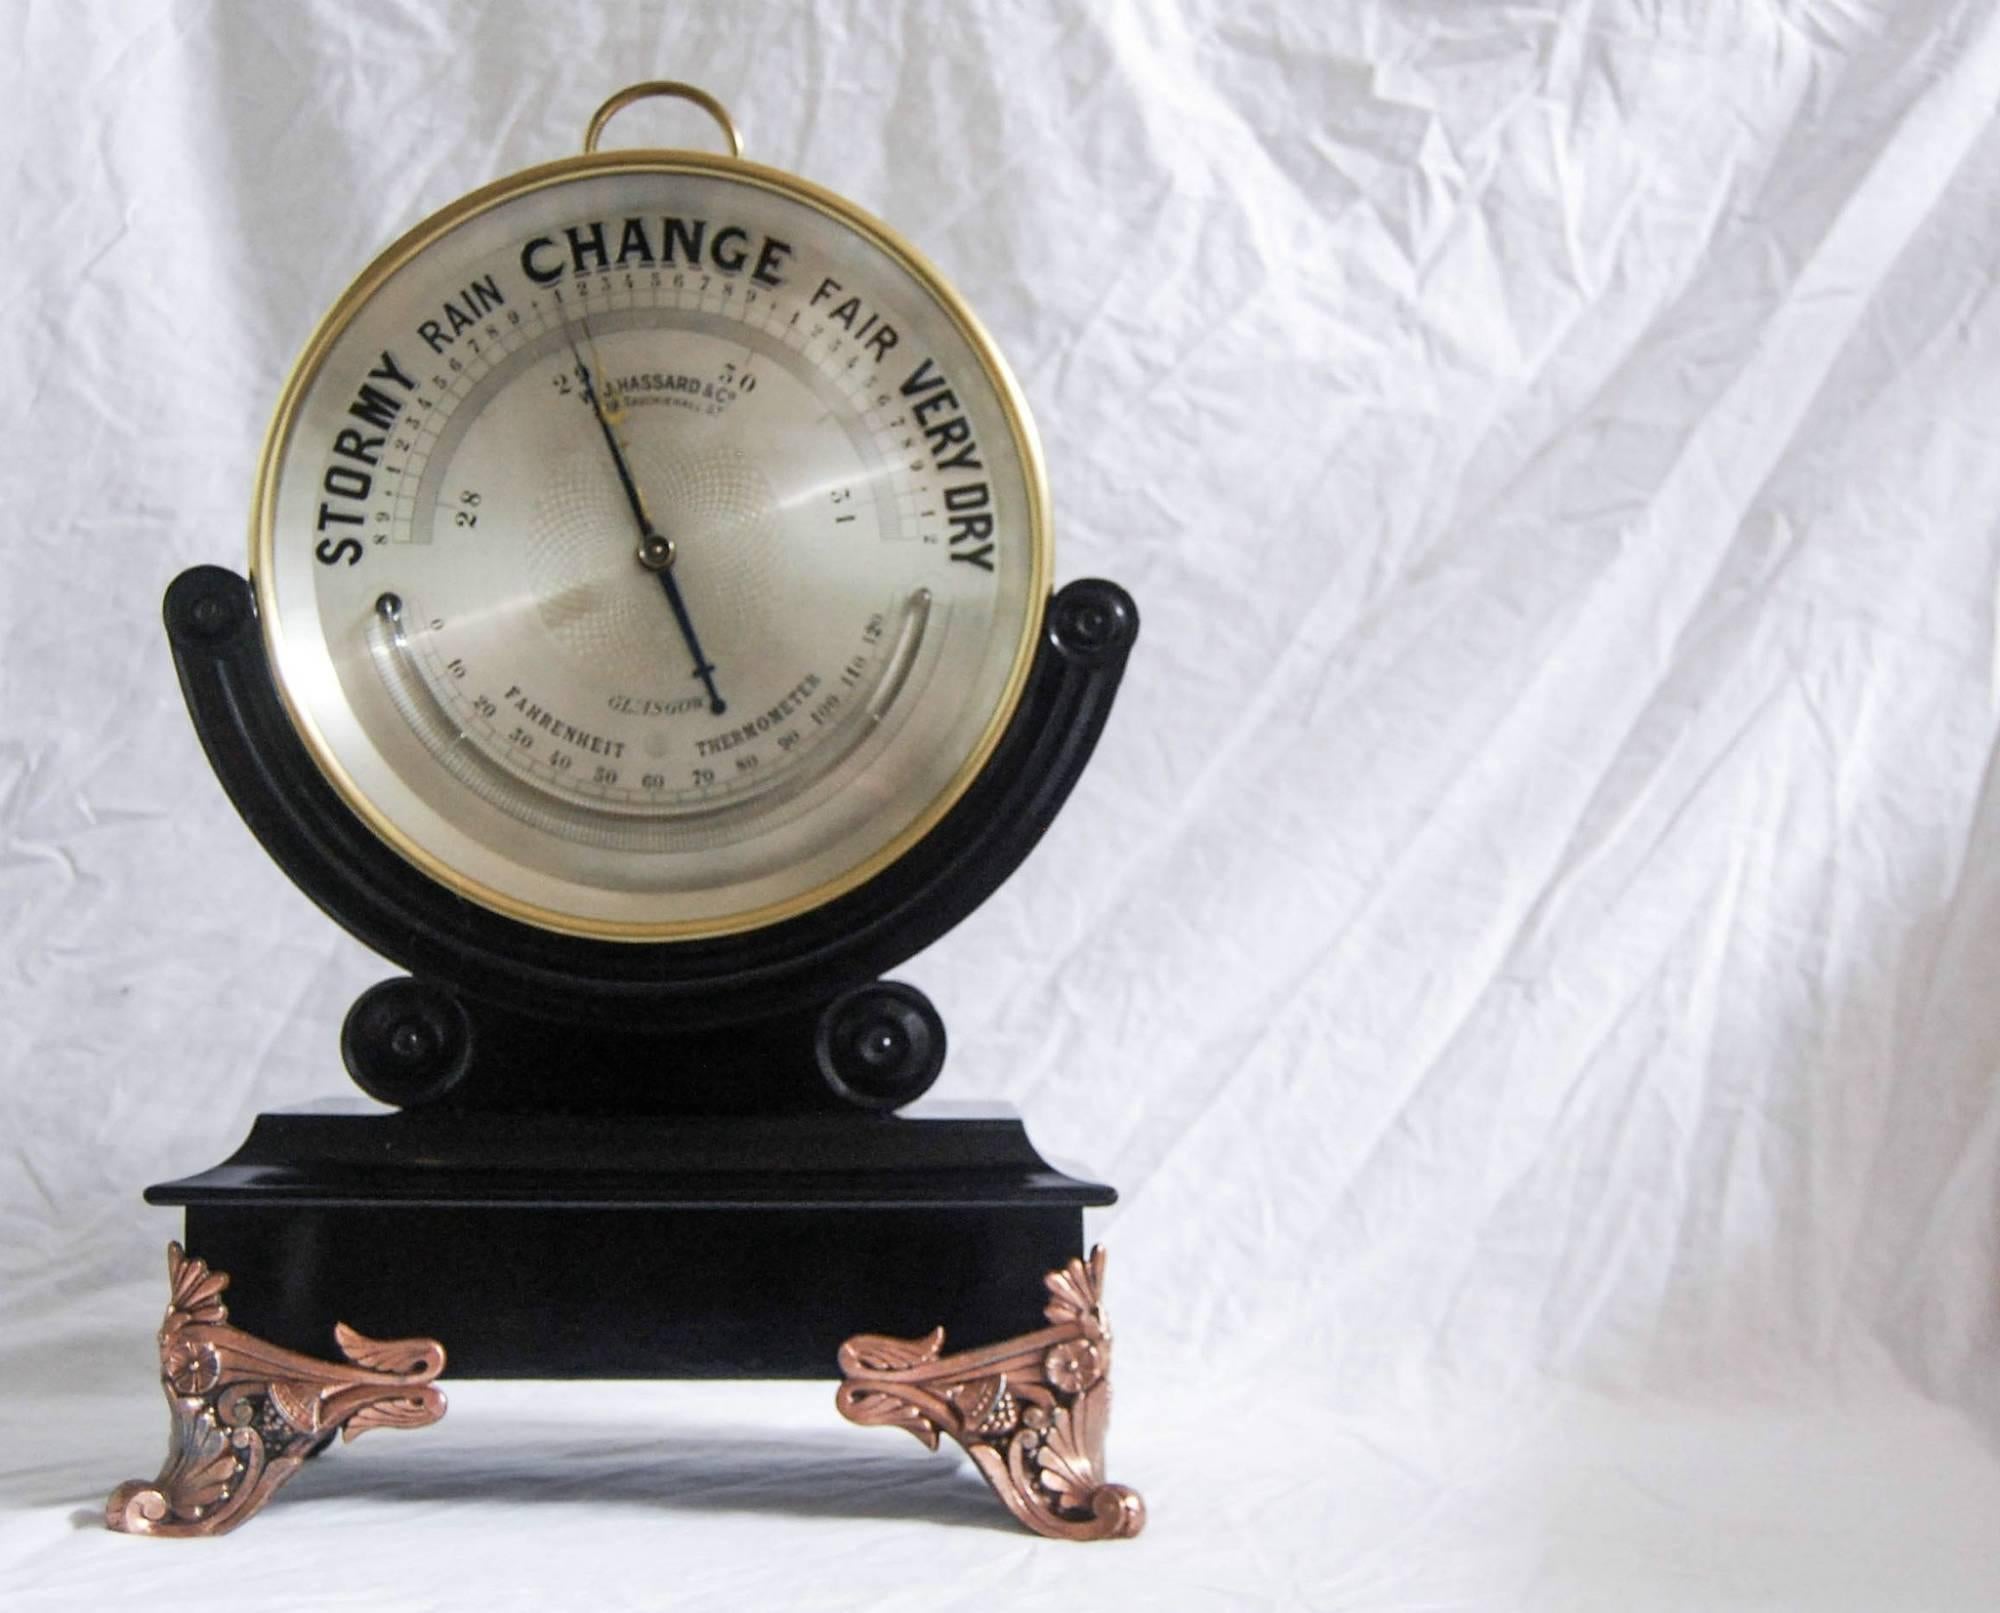 An extremely rare and unusual 10” dial brass aneroid barometer on ebonized stand and copper-plated decorative feet by WJ Hassard & Co, Opticians, 209 Sauchiehall Street Glasgow.

Apart from its unusual size this barometer also stands out for its